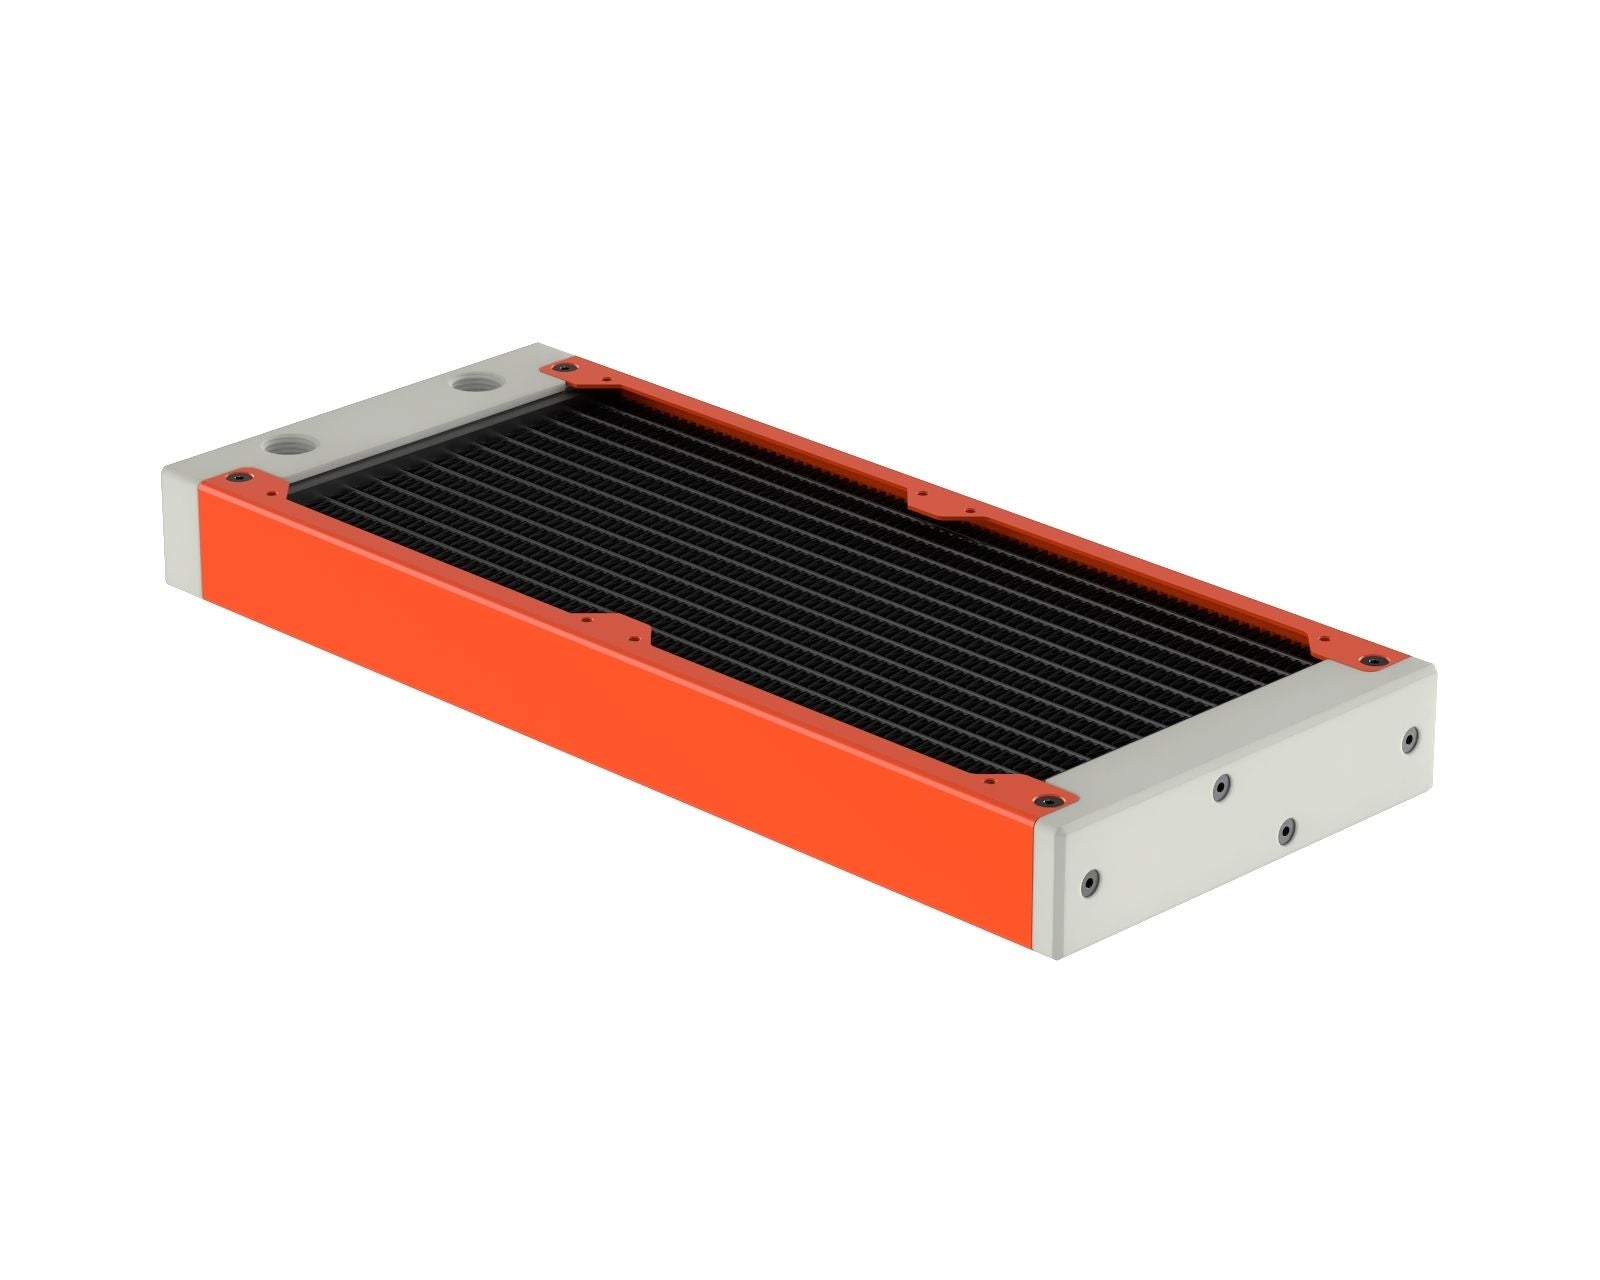 PrimoChill 240SL (30mm) EXIMO Modular Radiator, White POM, 2x120mm, Dual Fan (R-SL-W24) Available in 20+ Colors, Assembled in USA and Custom Watercooling Loop Ready - UV Orange